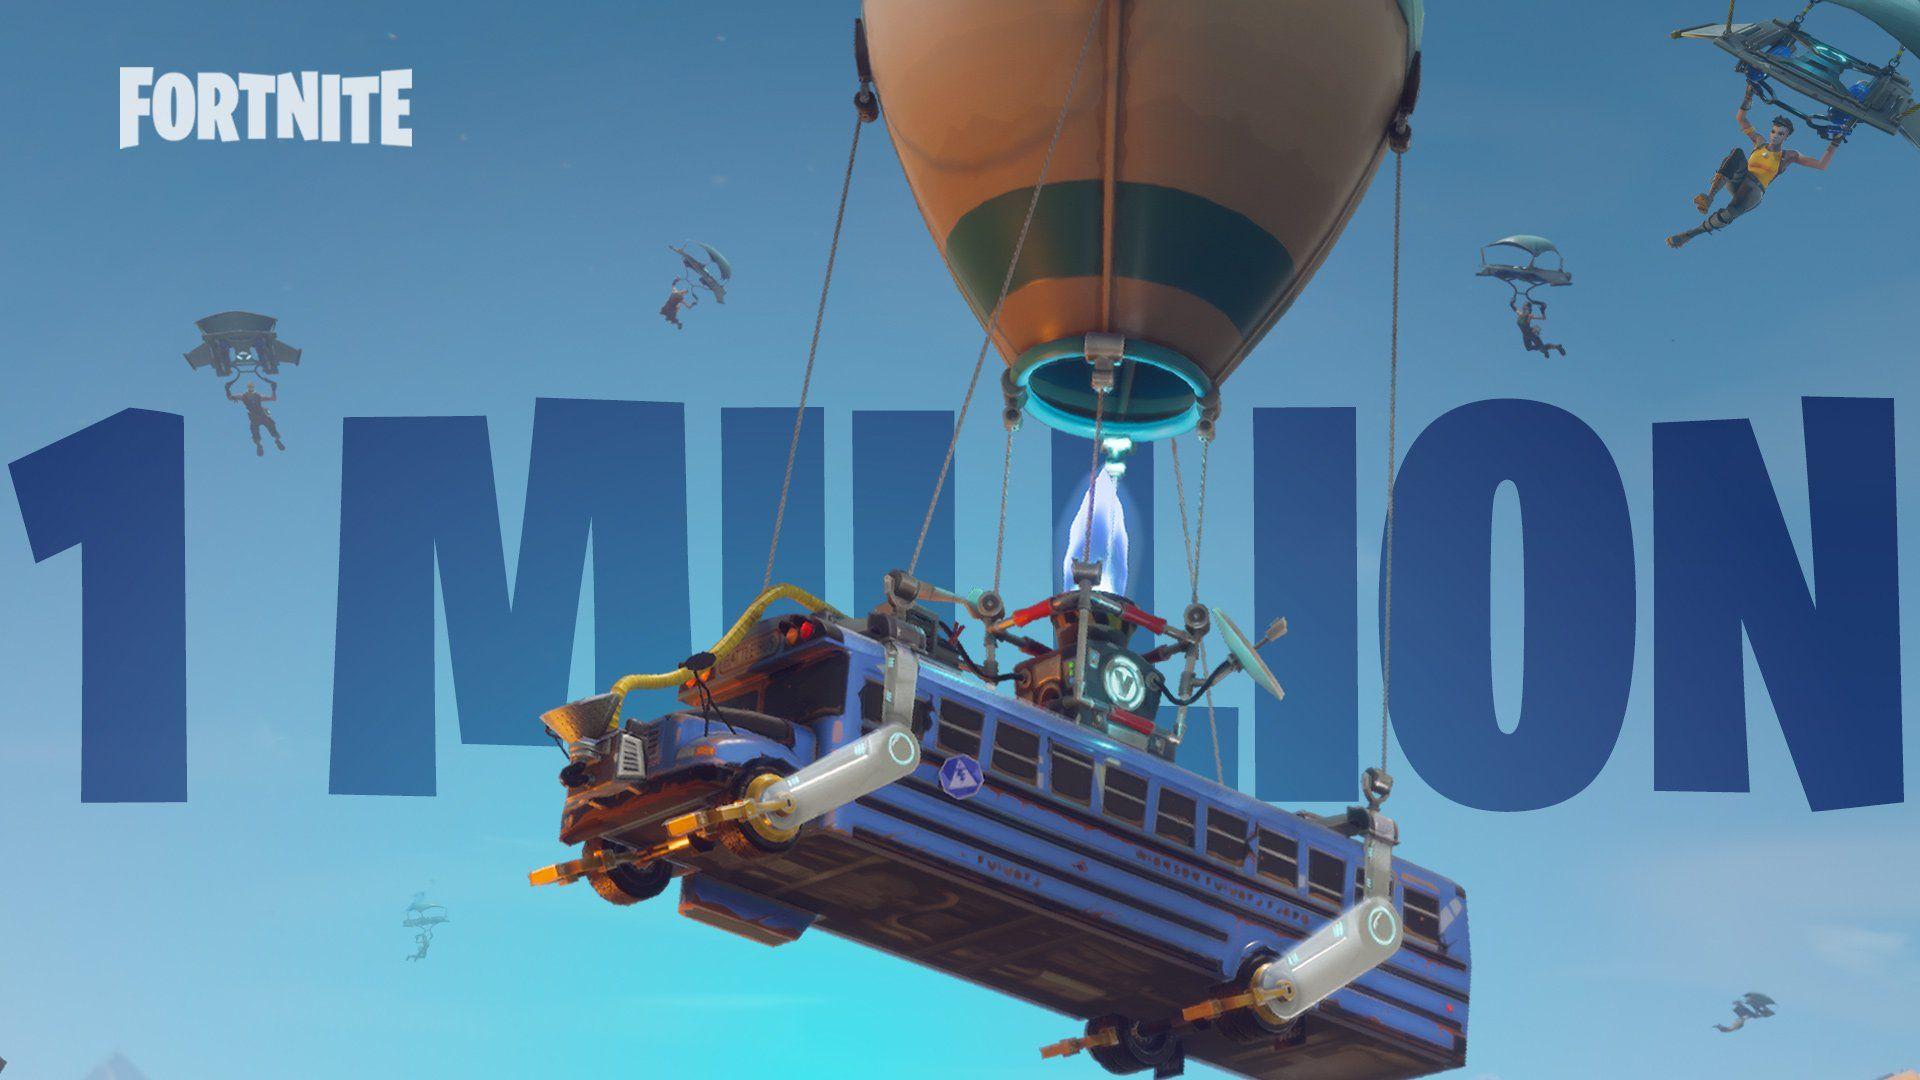 Fortnite: Battle Royale Reaches Over One Million Players in First